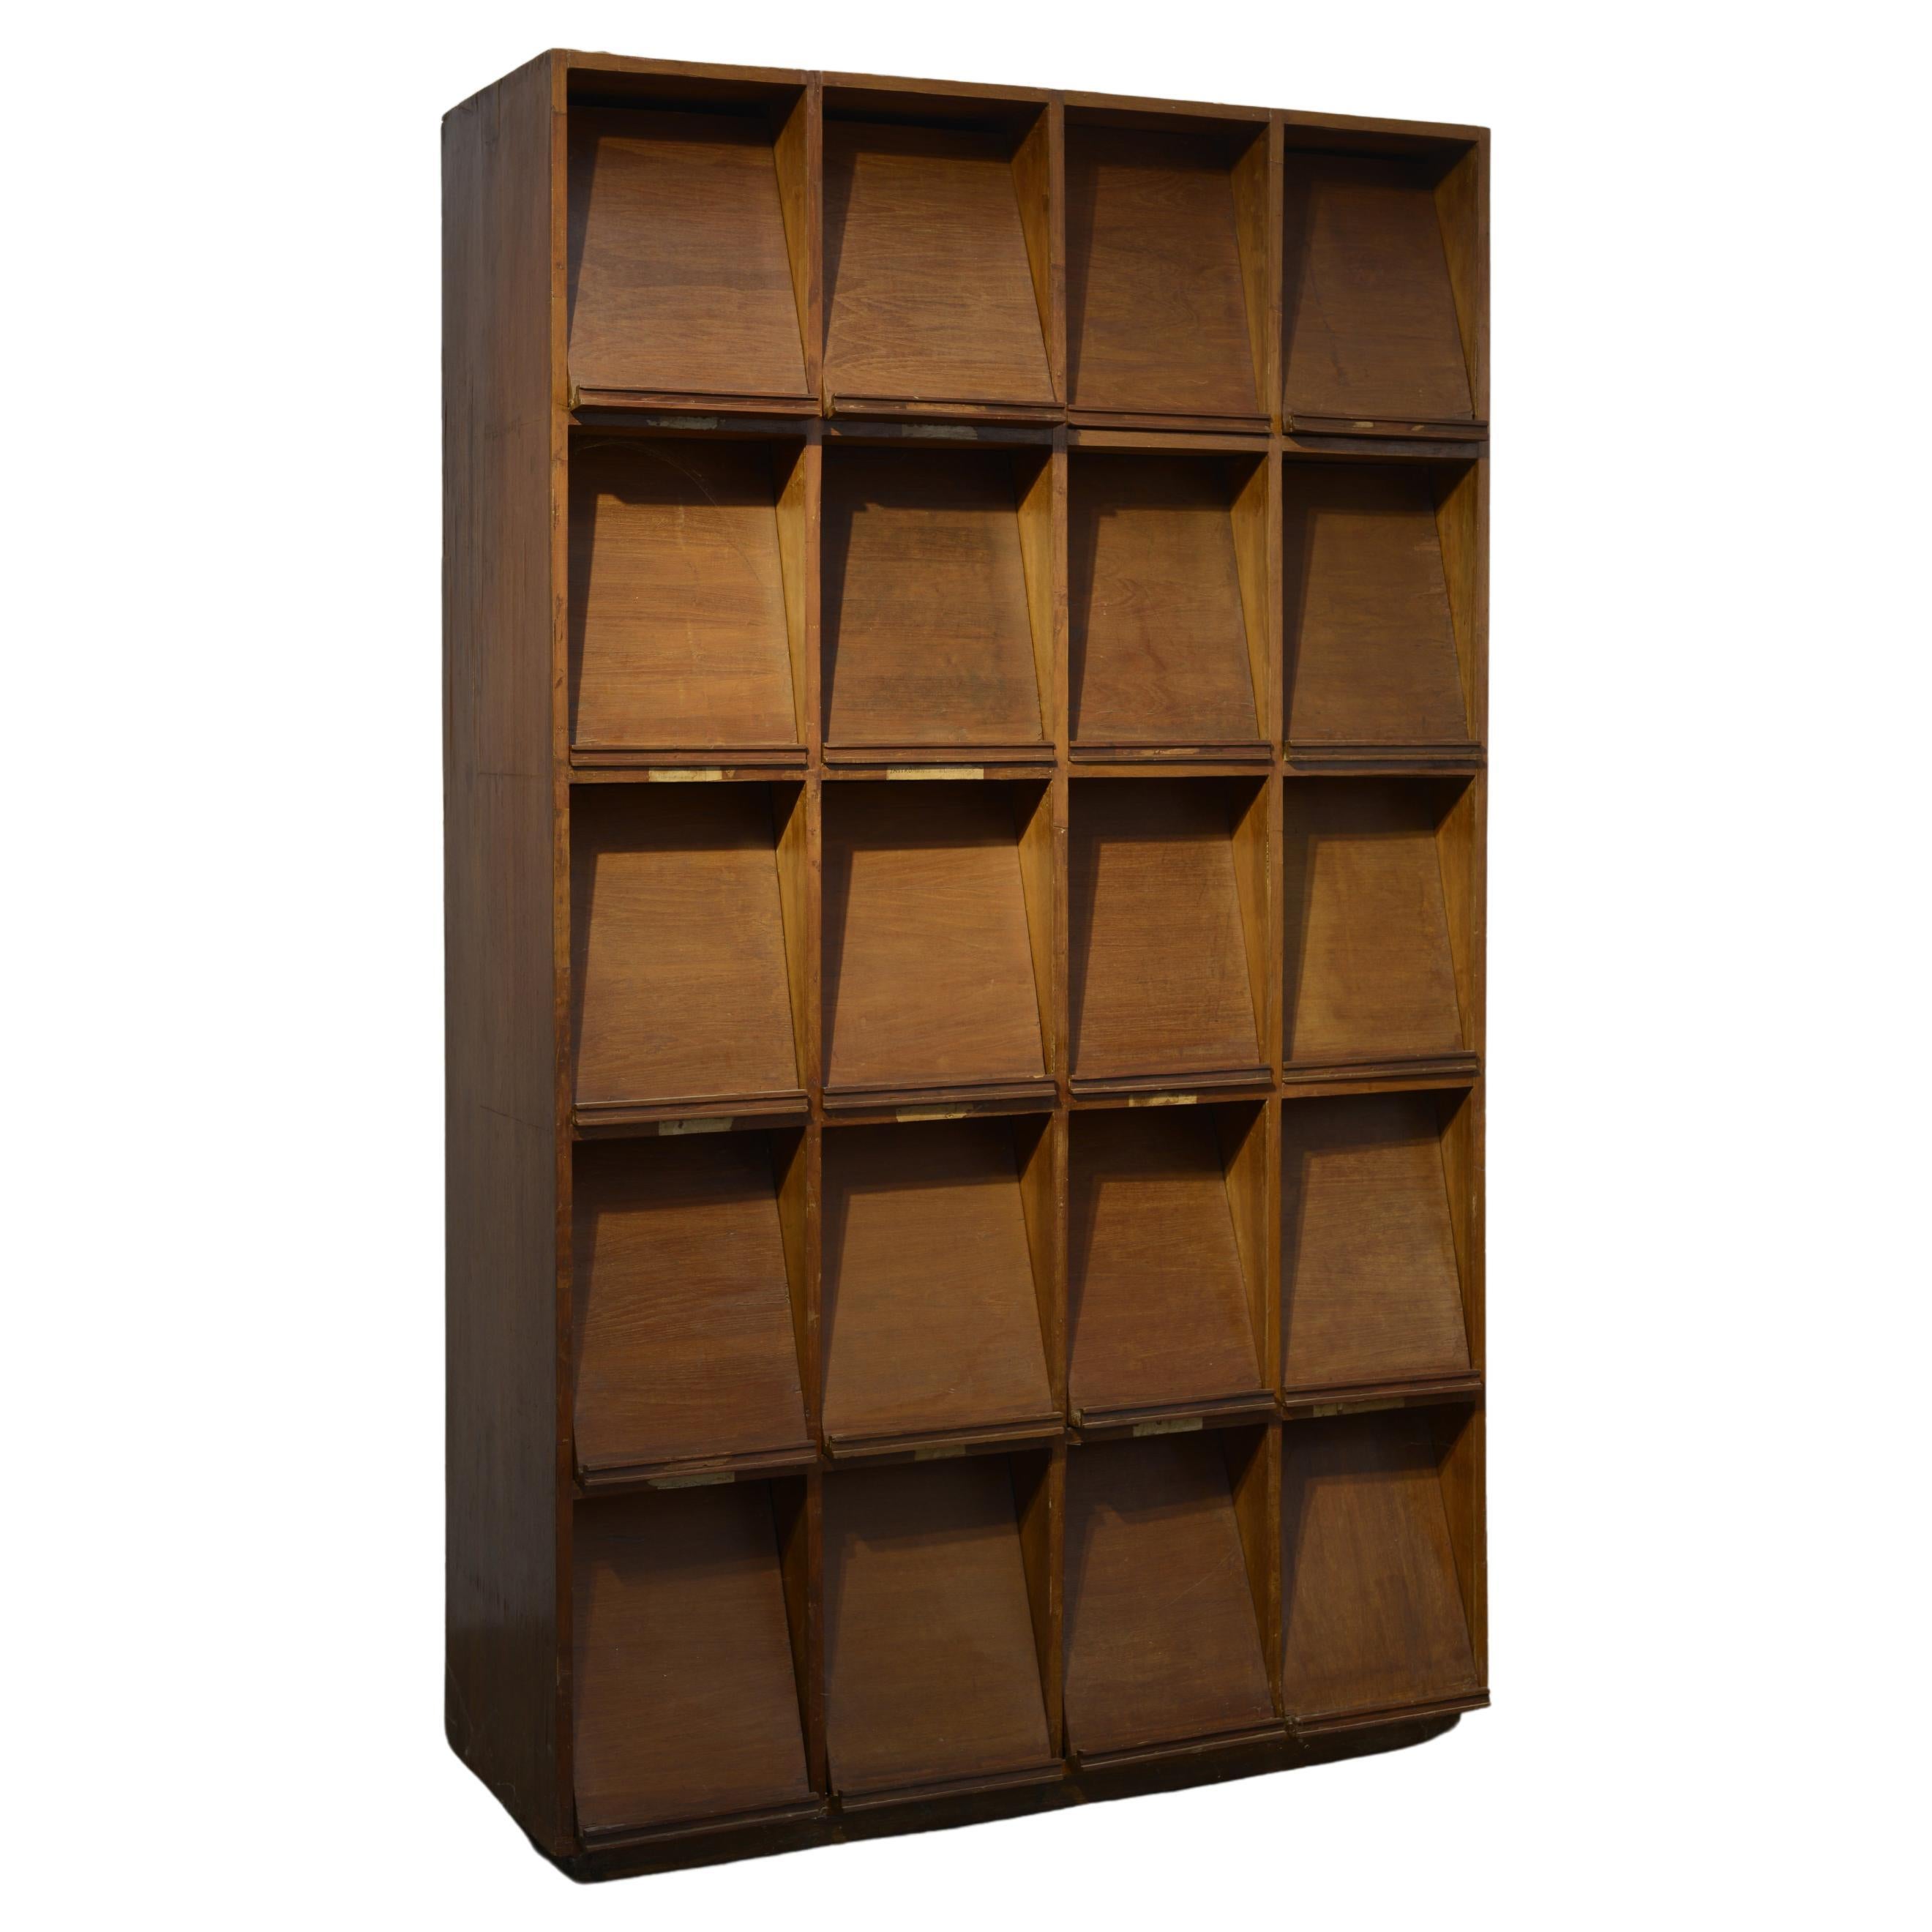 Pierre Jeanneret PJ-R-26-A Periodical Book Case / Authentic Mid-Century Modern For Sale